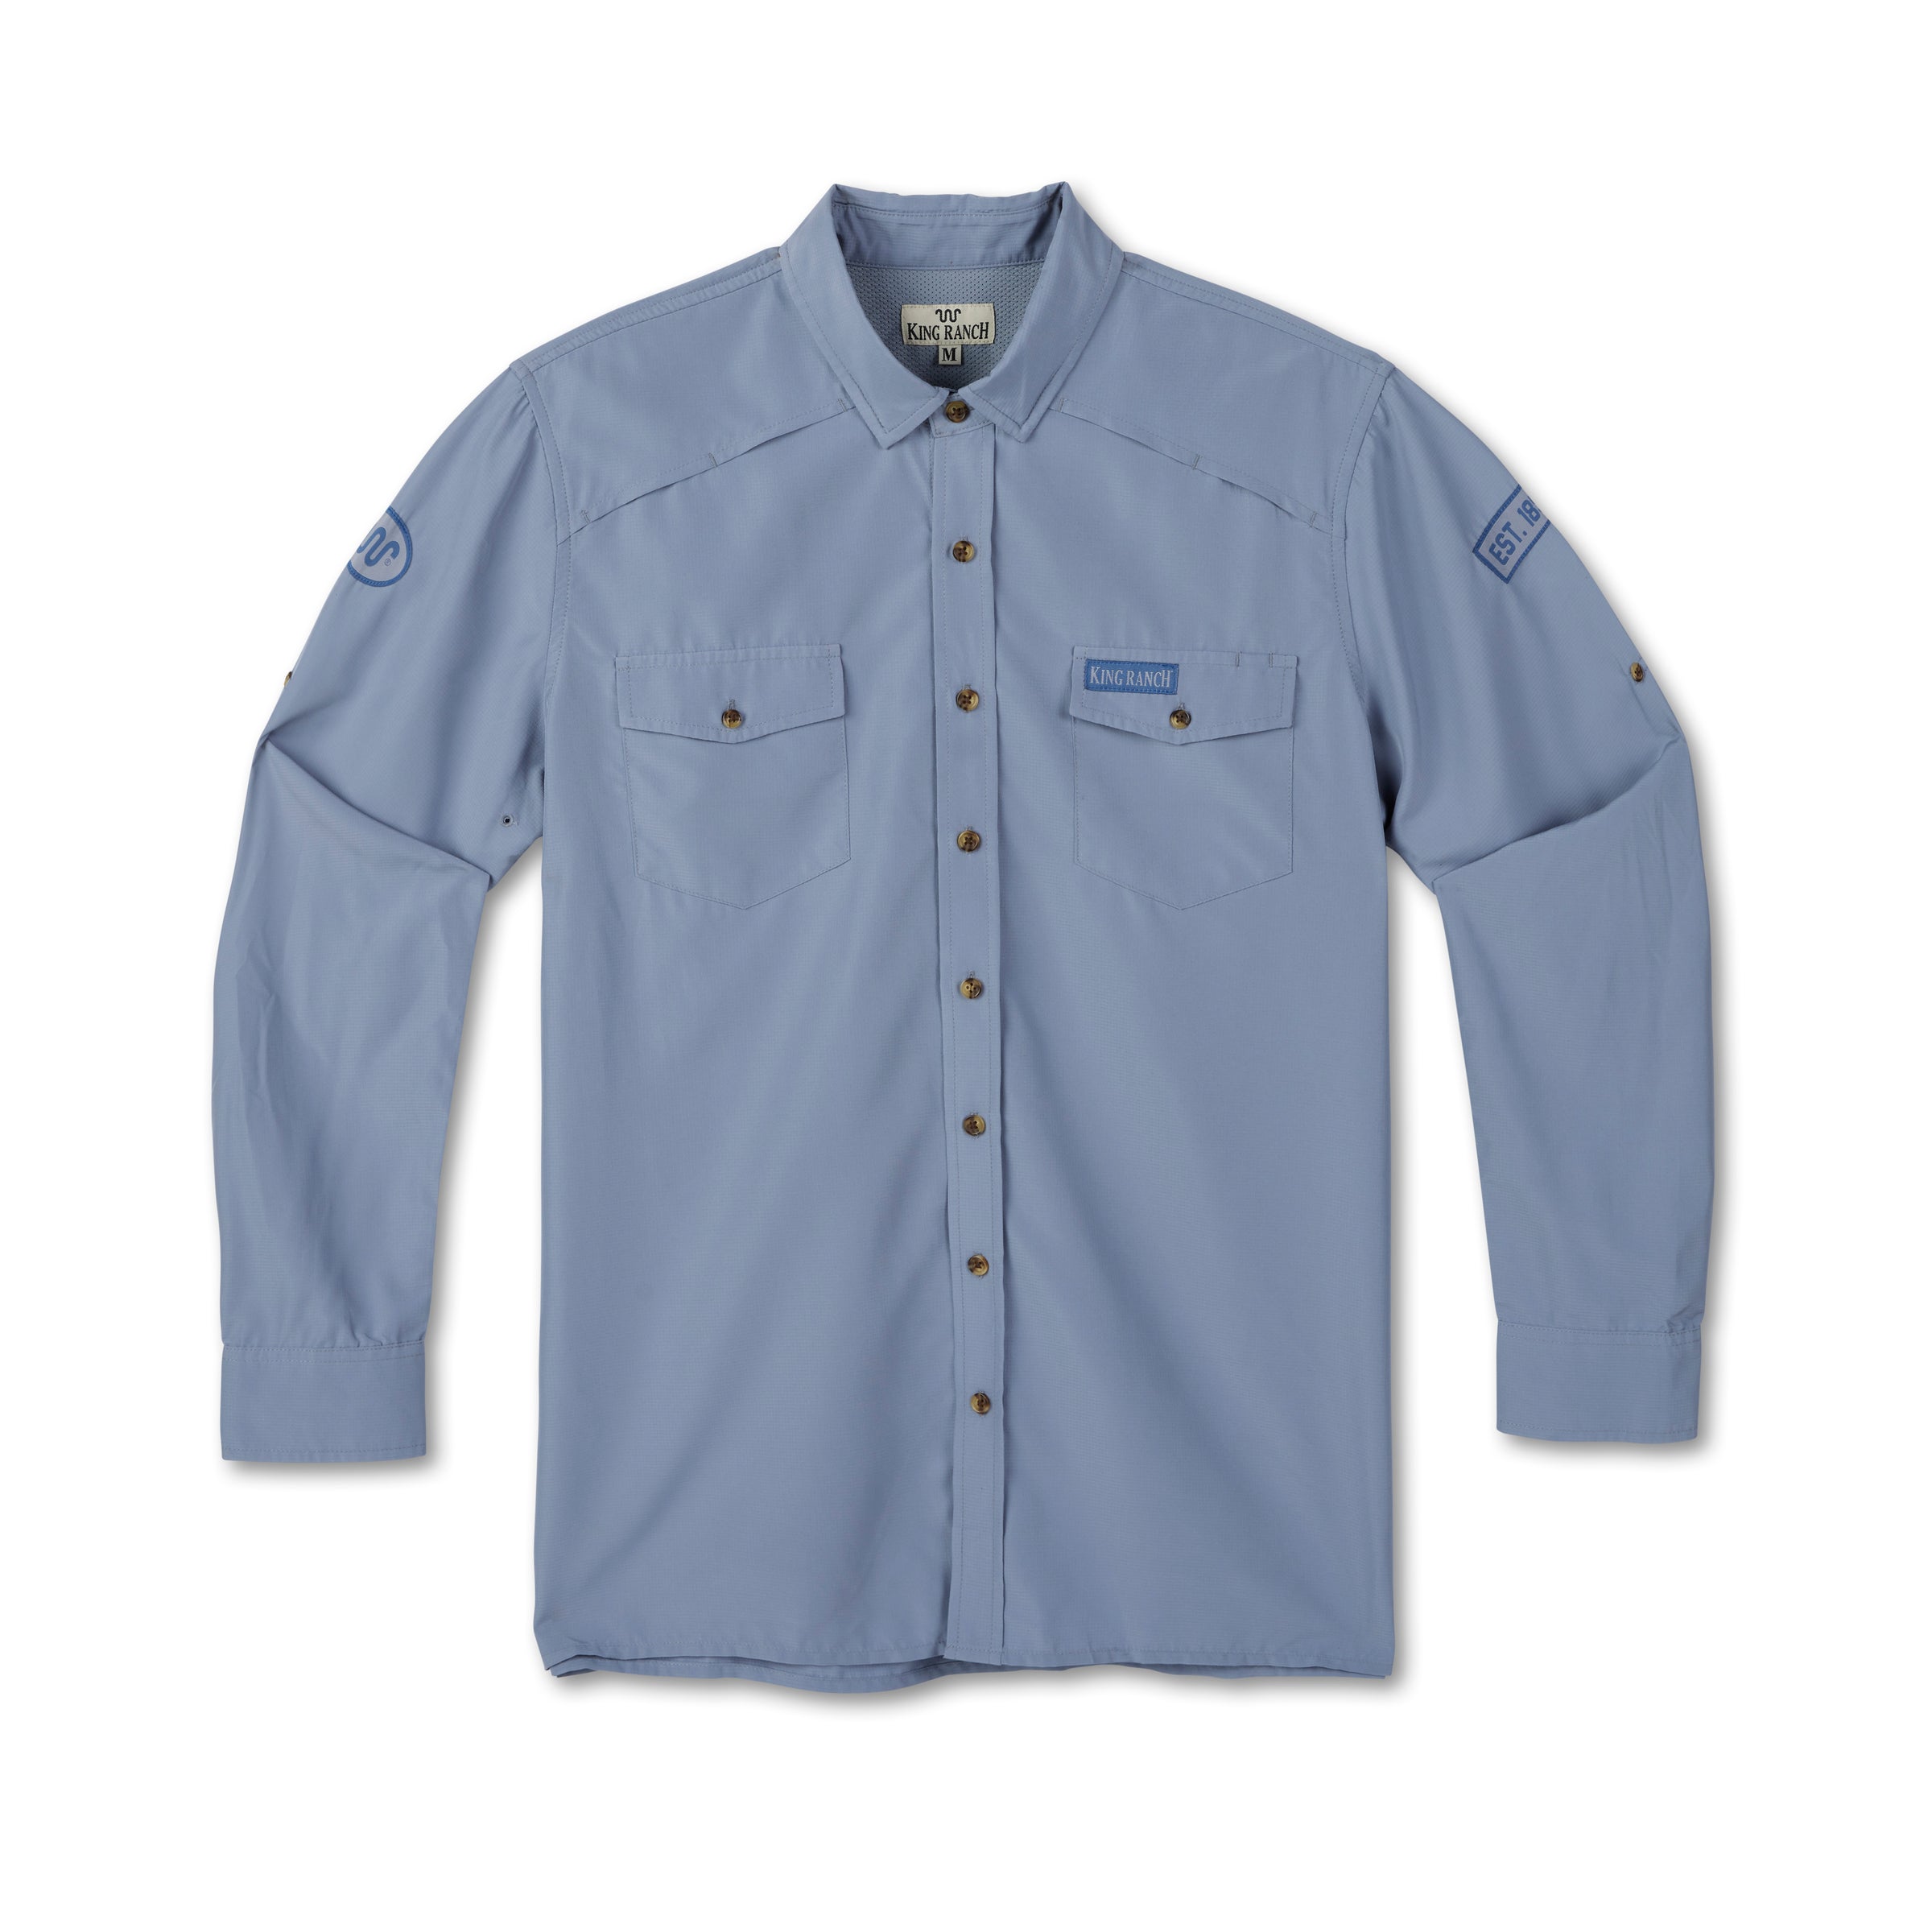 Men's L/S Classic Fishing Shirt with Badges